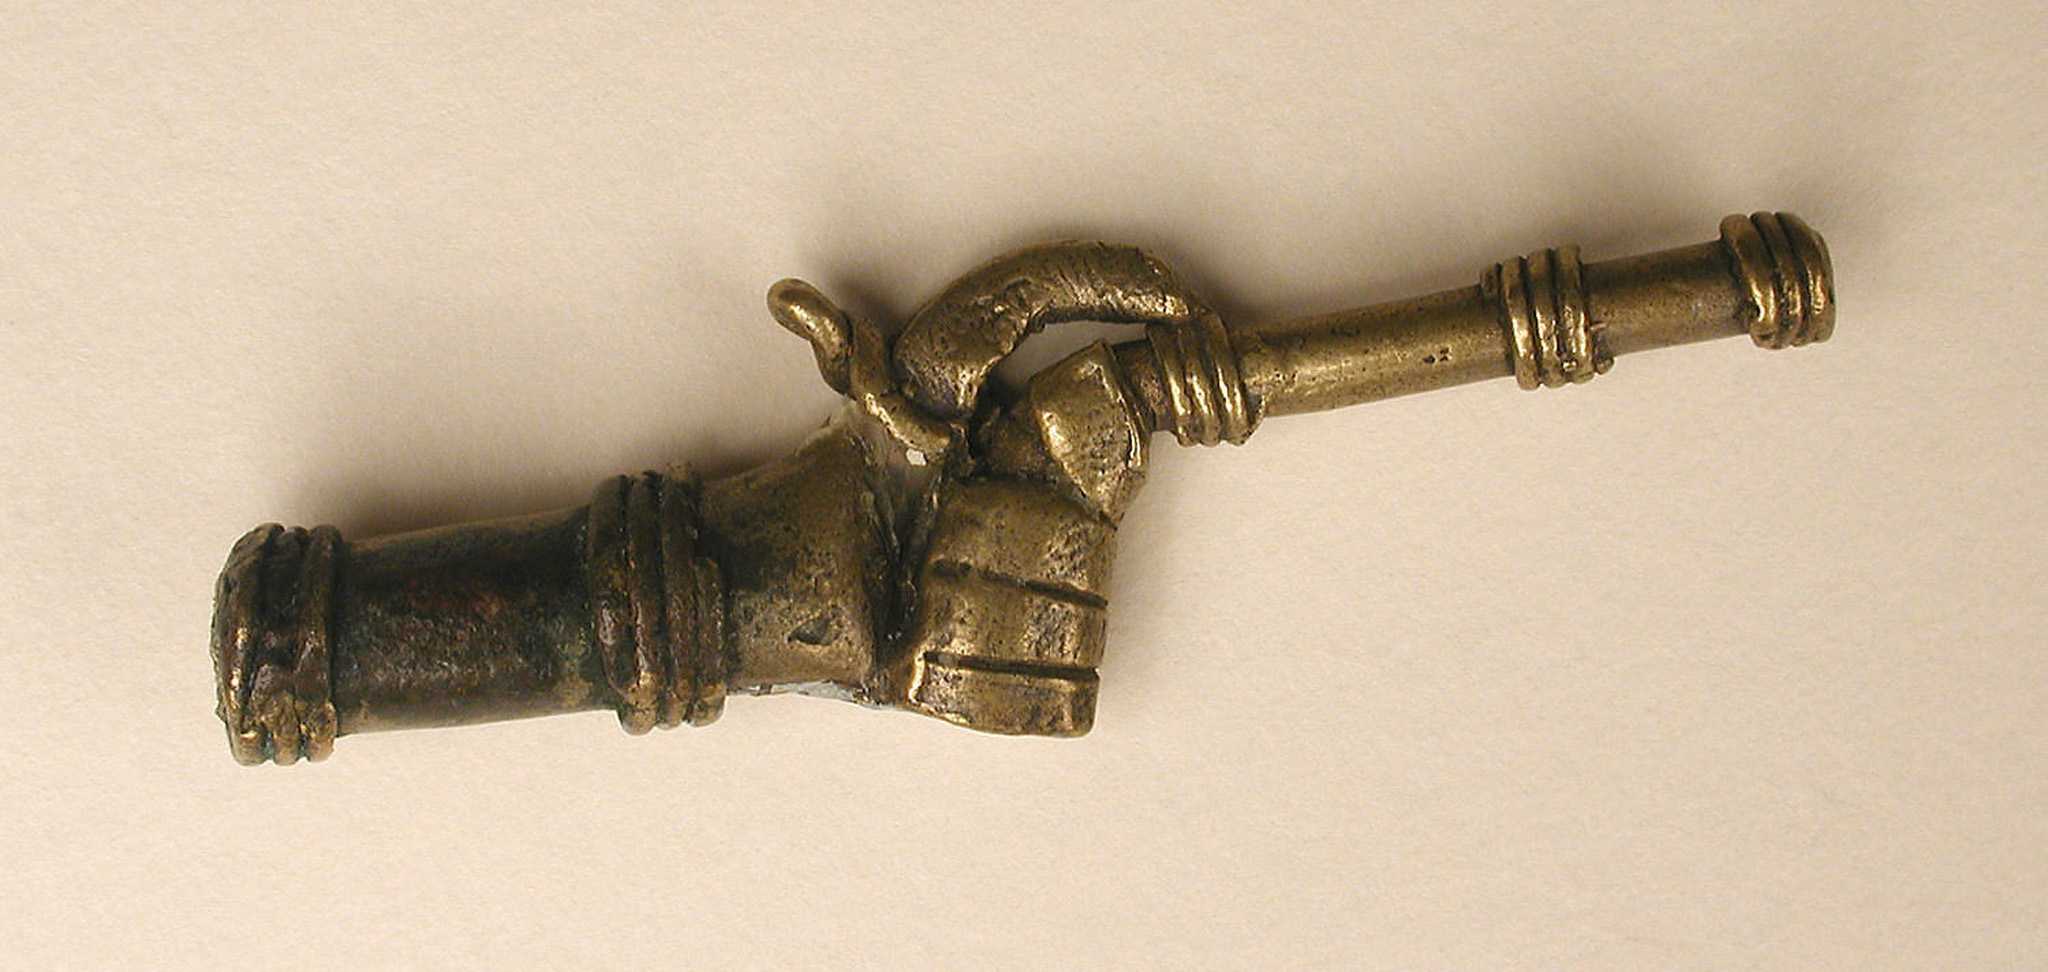 Photograph of Akan weight in the shape of a hand holding a rifle